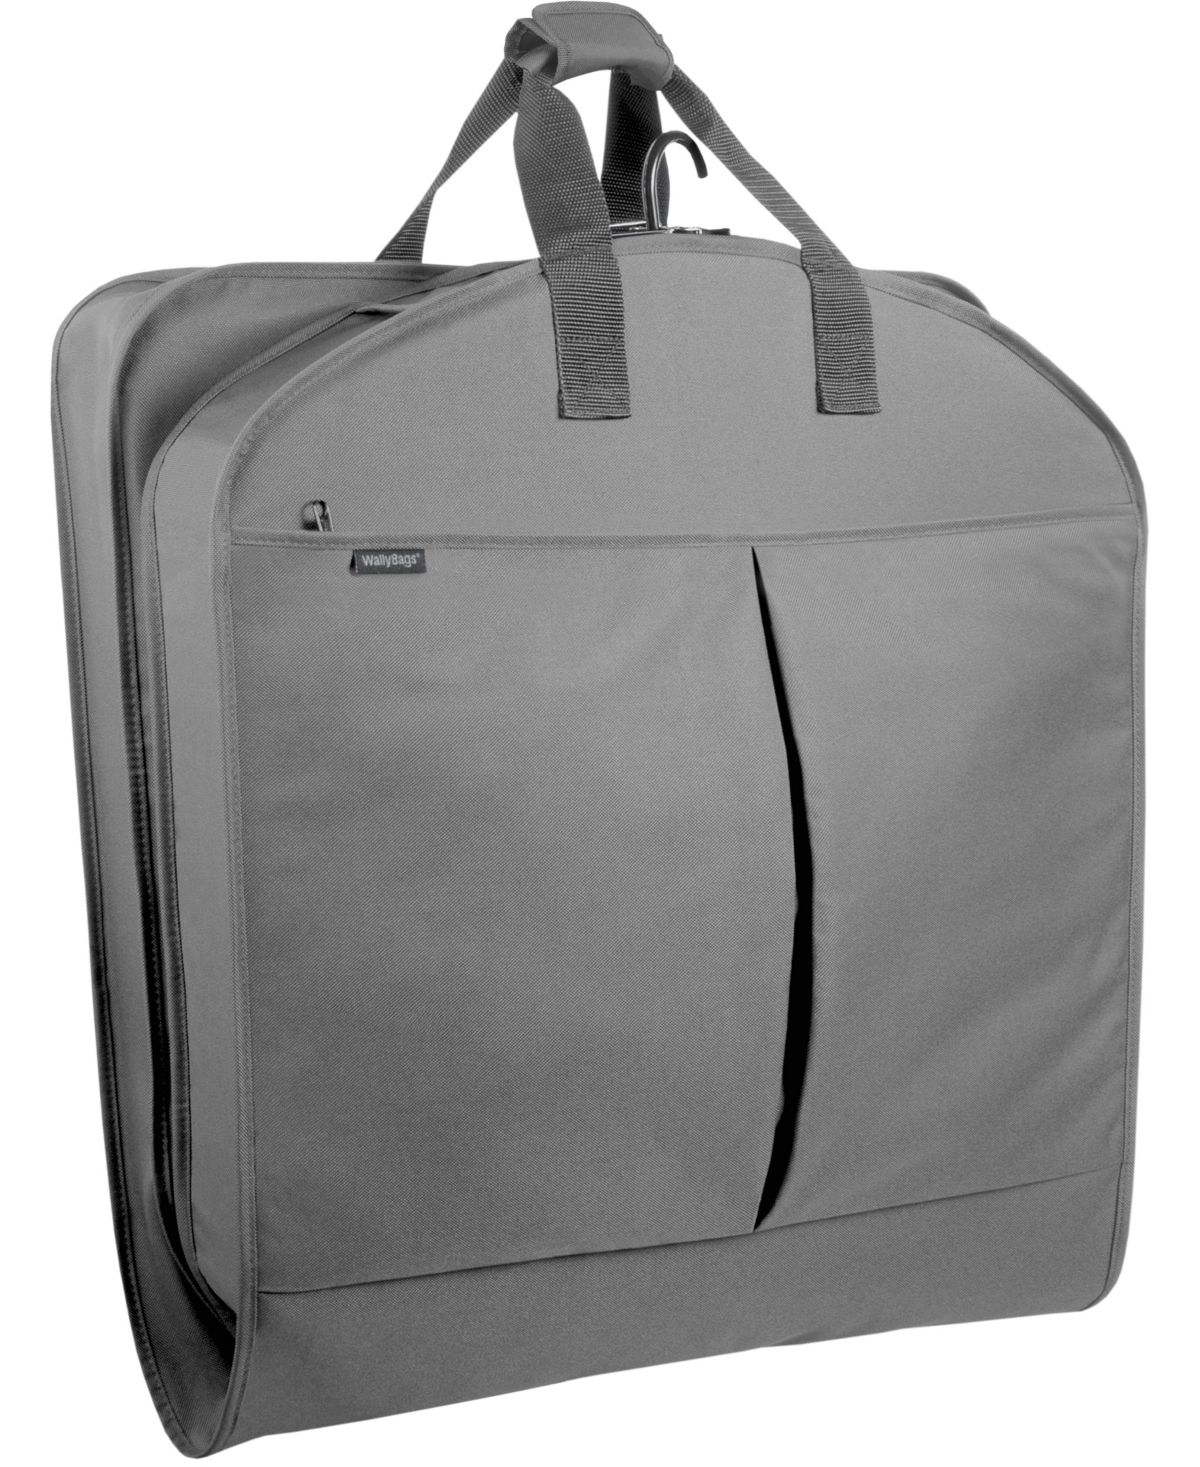 Shop Wallybags 52" Deluxe Travel Garment Bag With Pockets In Gray